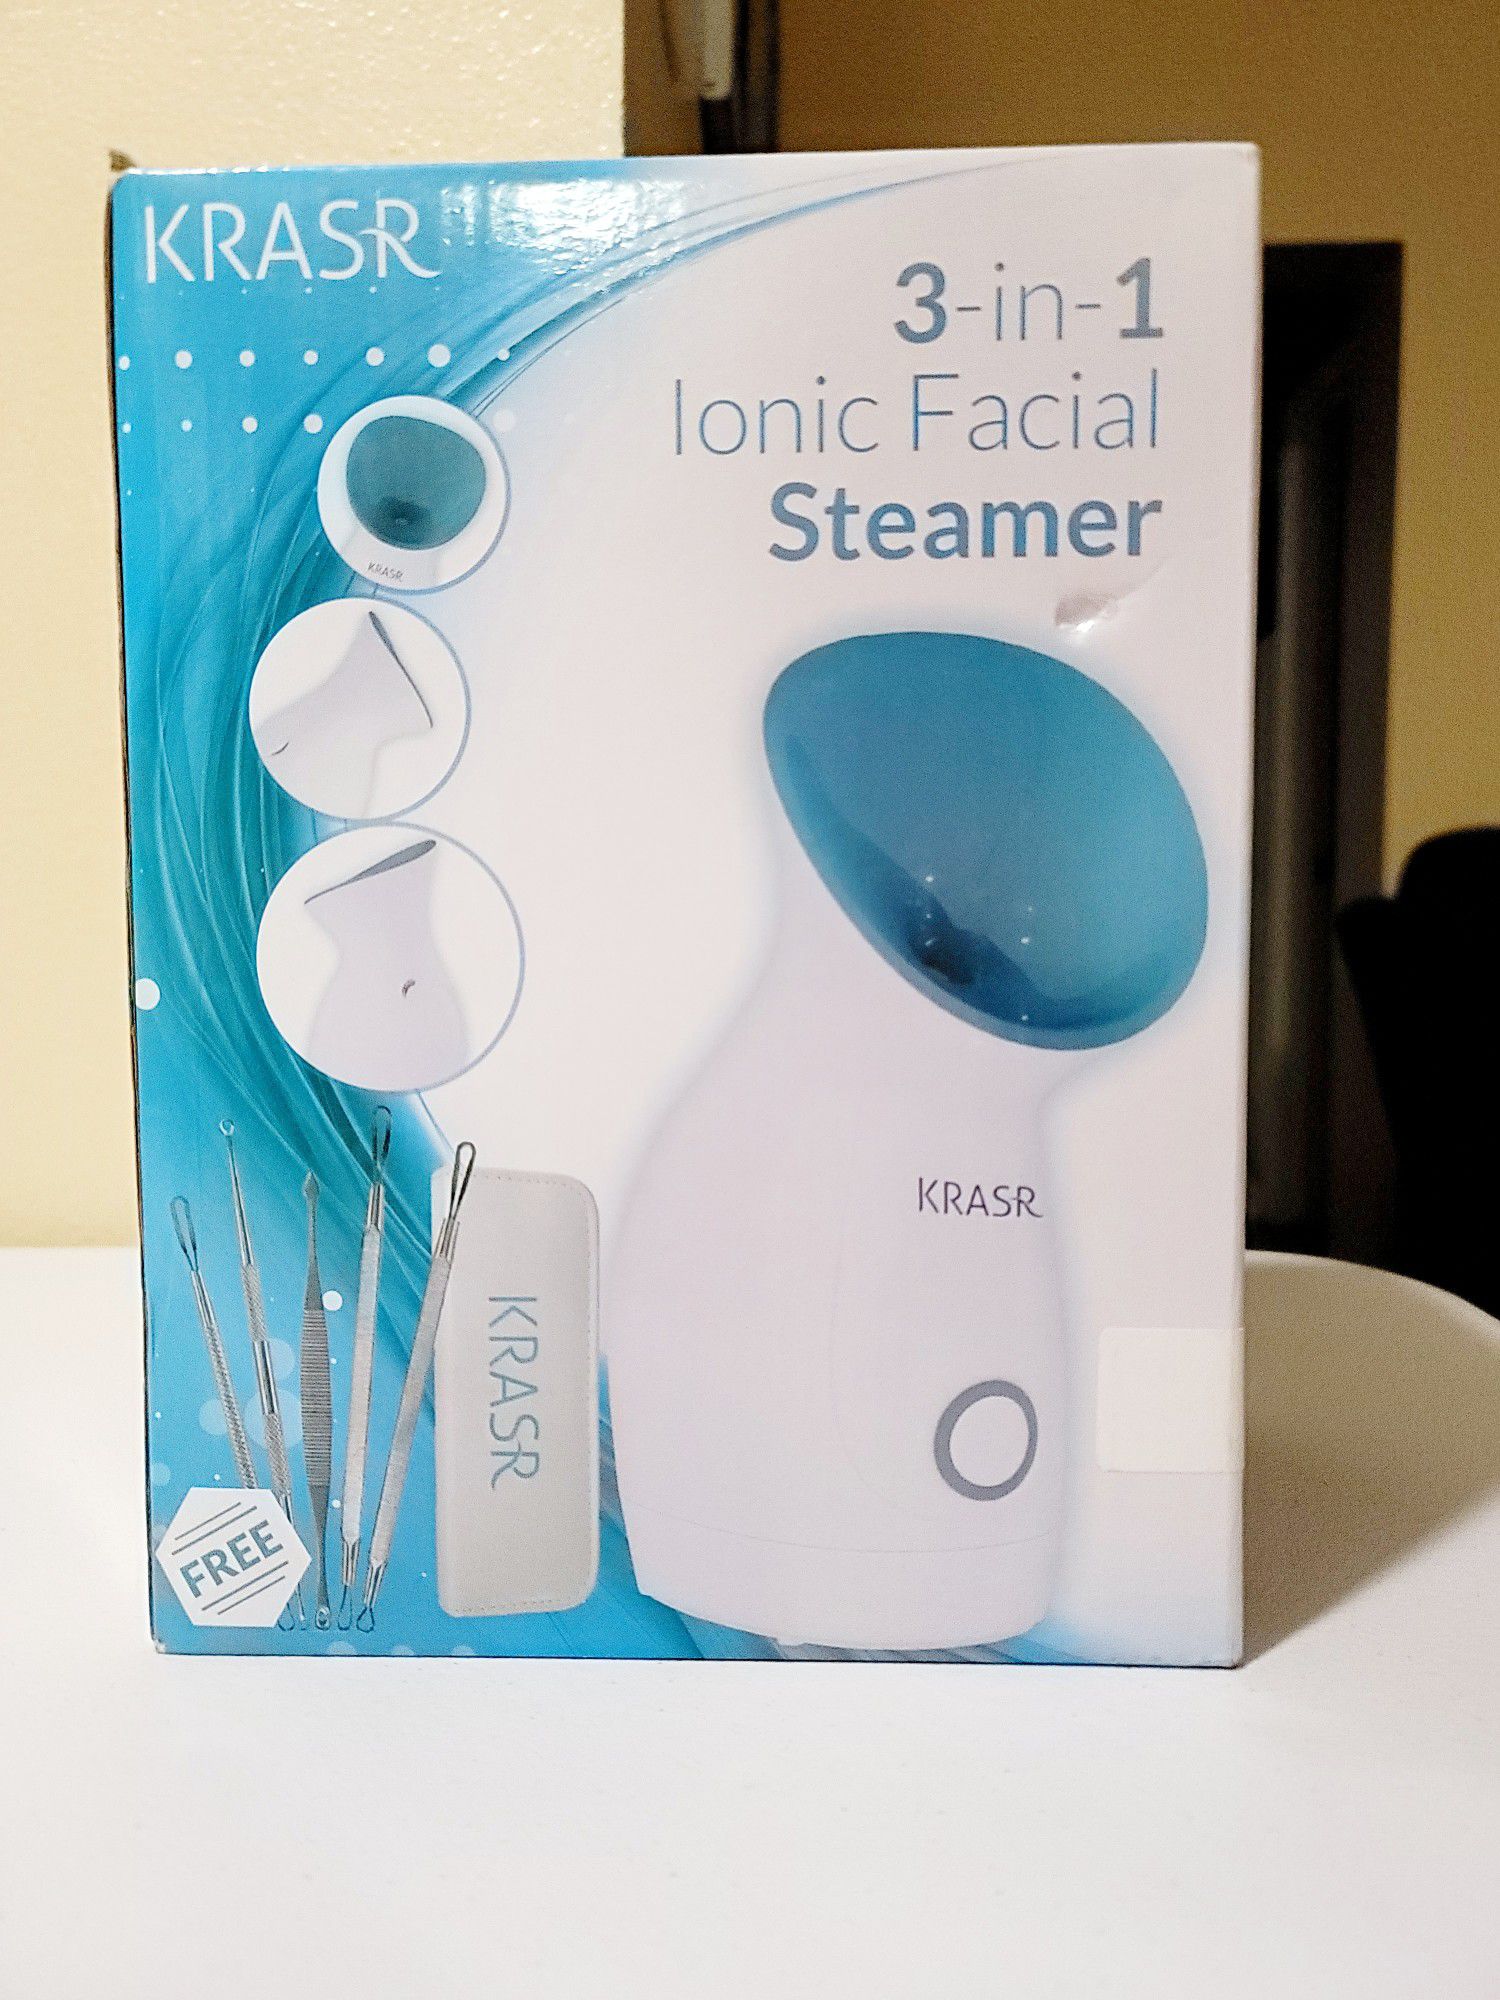 New Iconic Facial Steamer